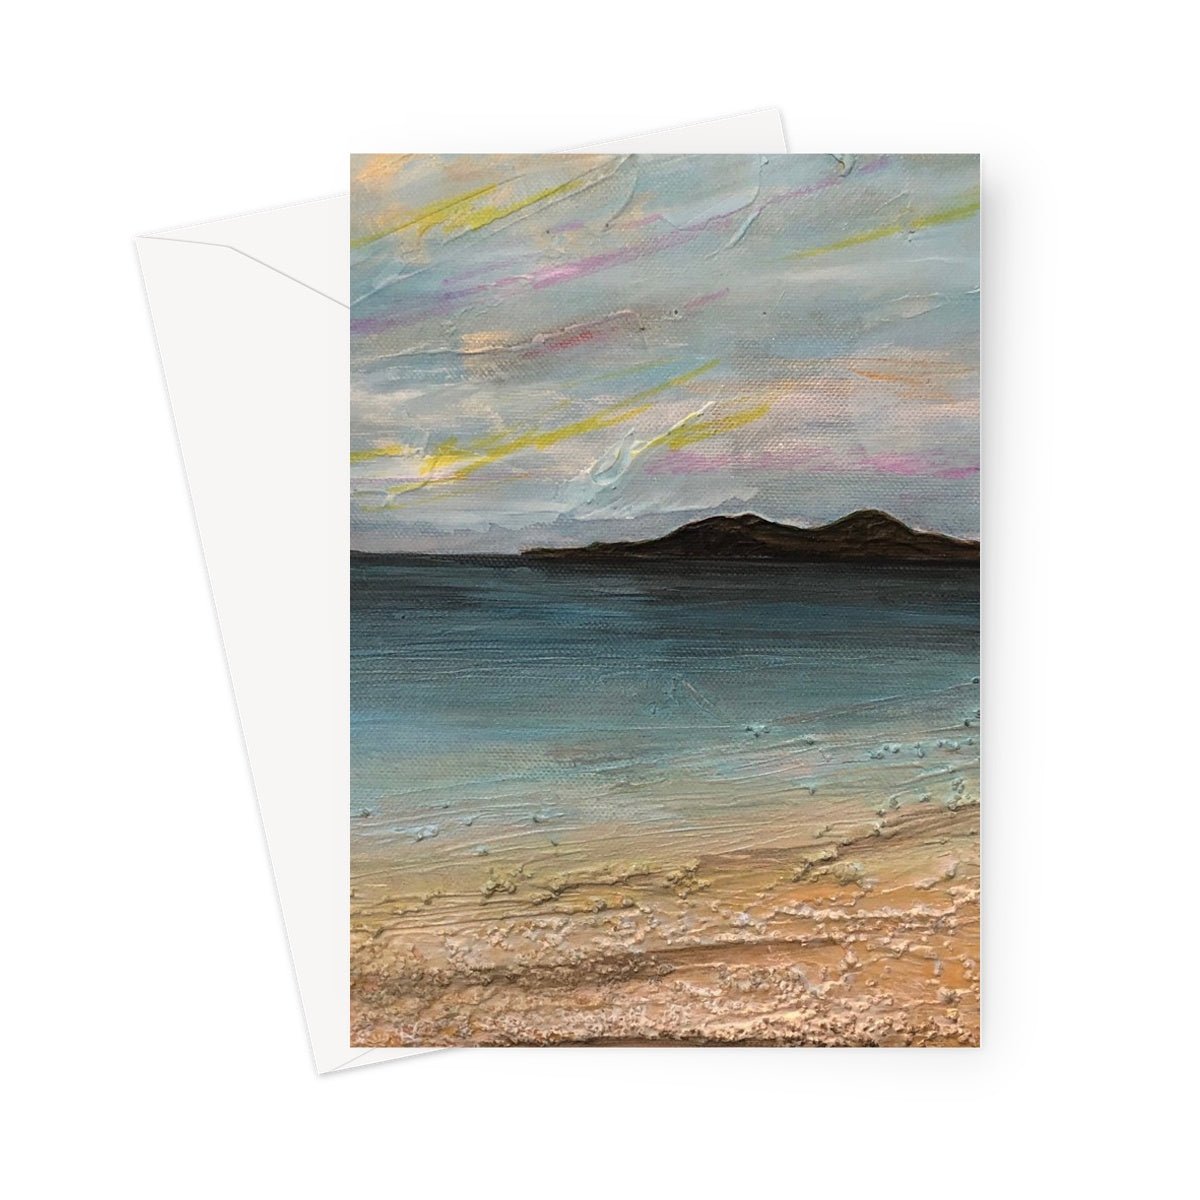 Garrynamonie Beach South Uist Art Gifts Greeting Card-Greetings Cards-Hebridean Islands Art Gallery-5"x7"-1 Card-Paintings, Prints, Homeware, Art Gifts From Scotland By Scottish Artist Kevin Hunter